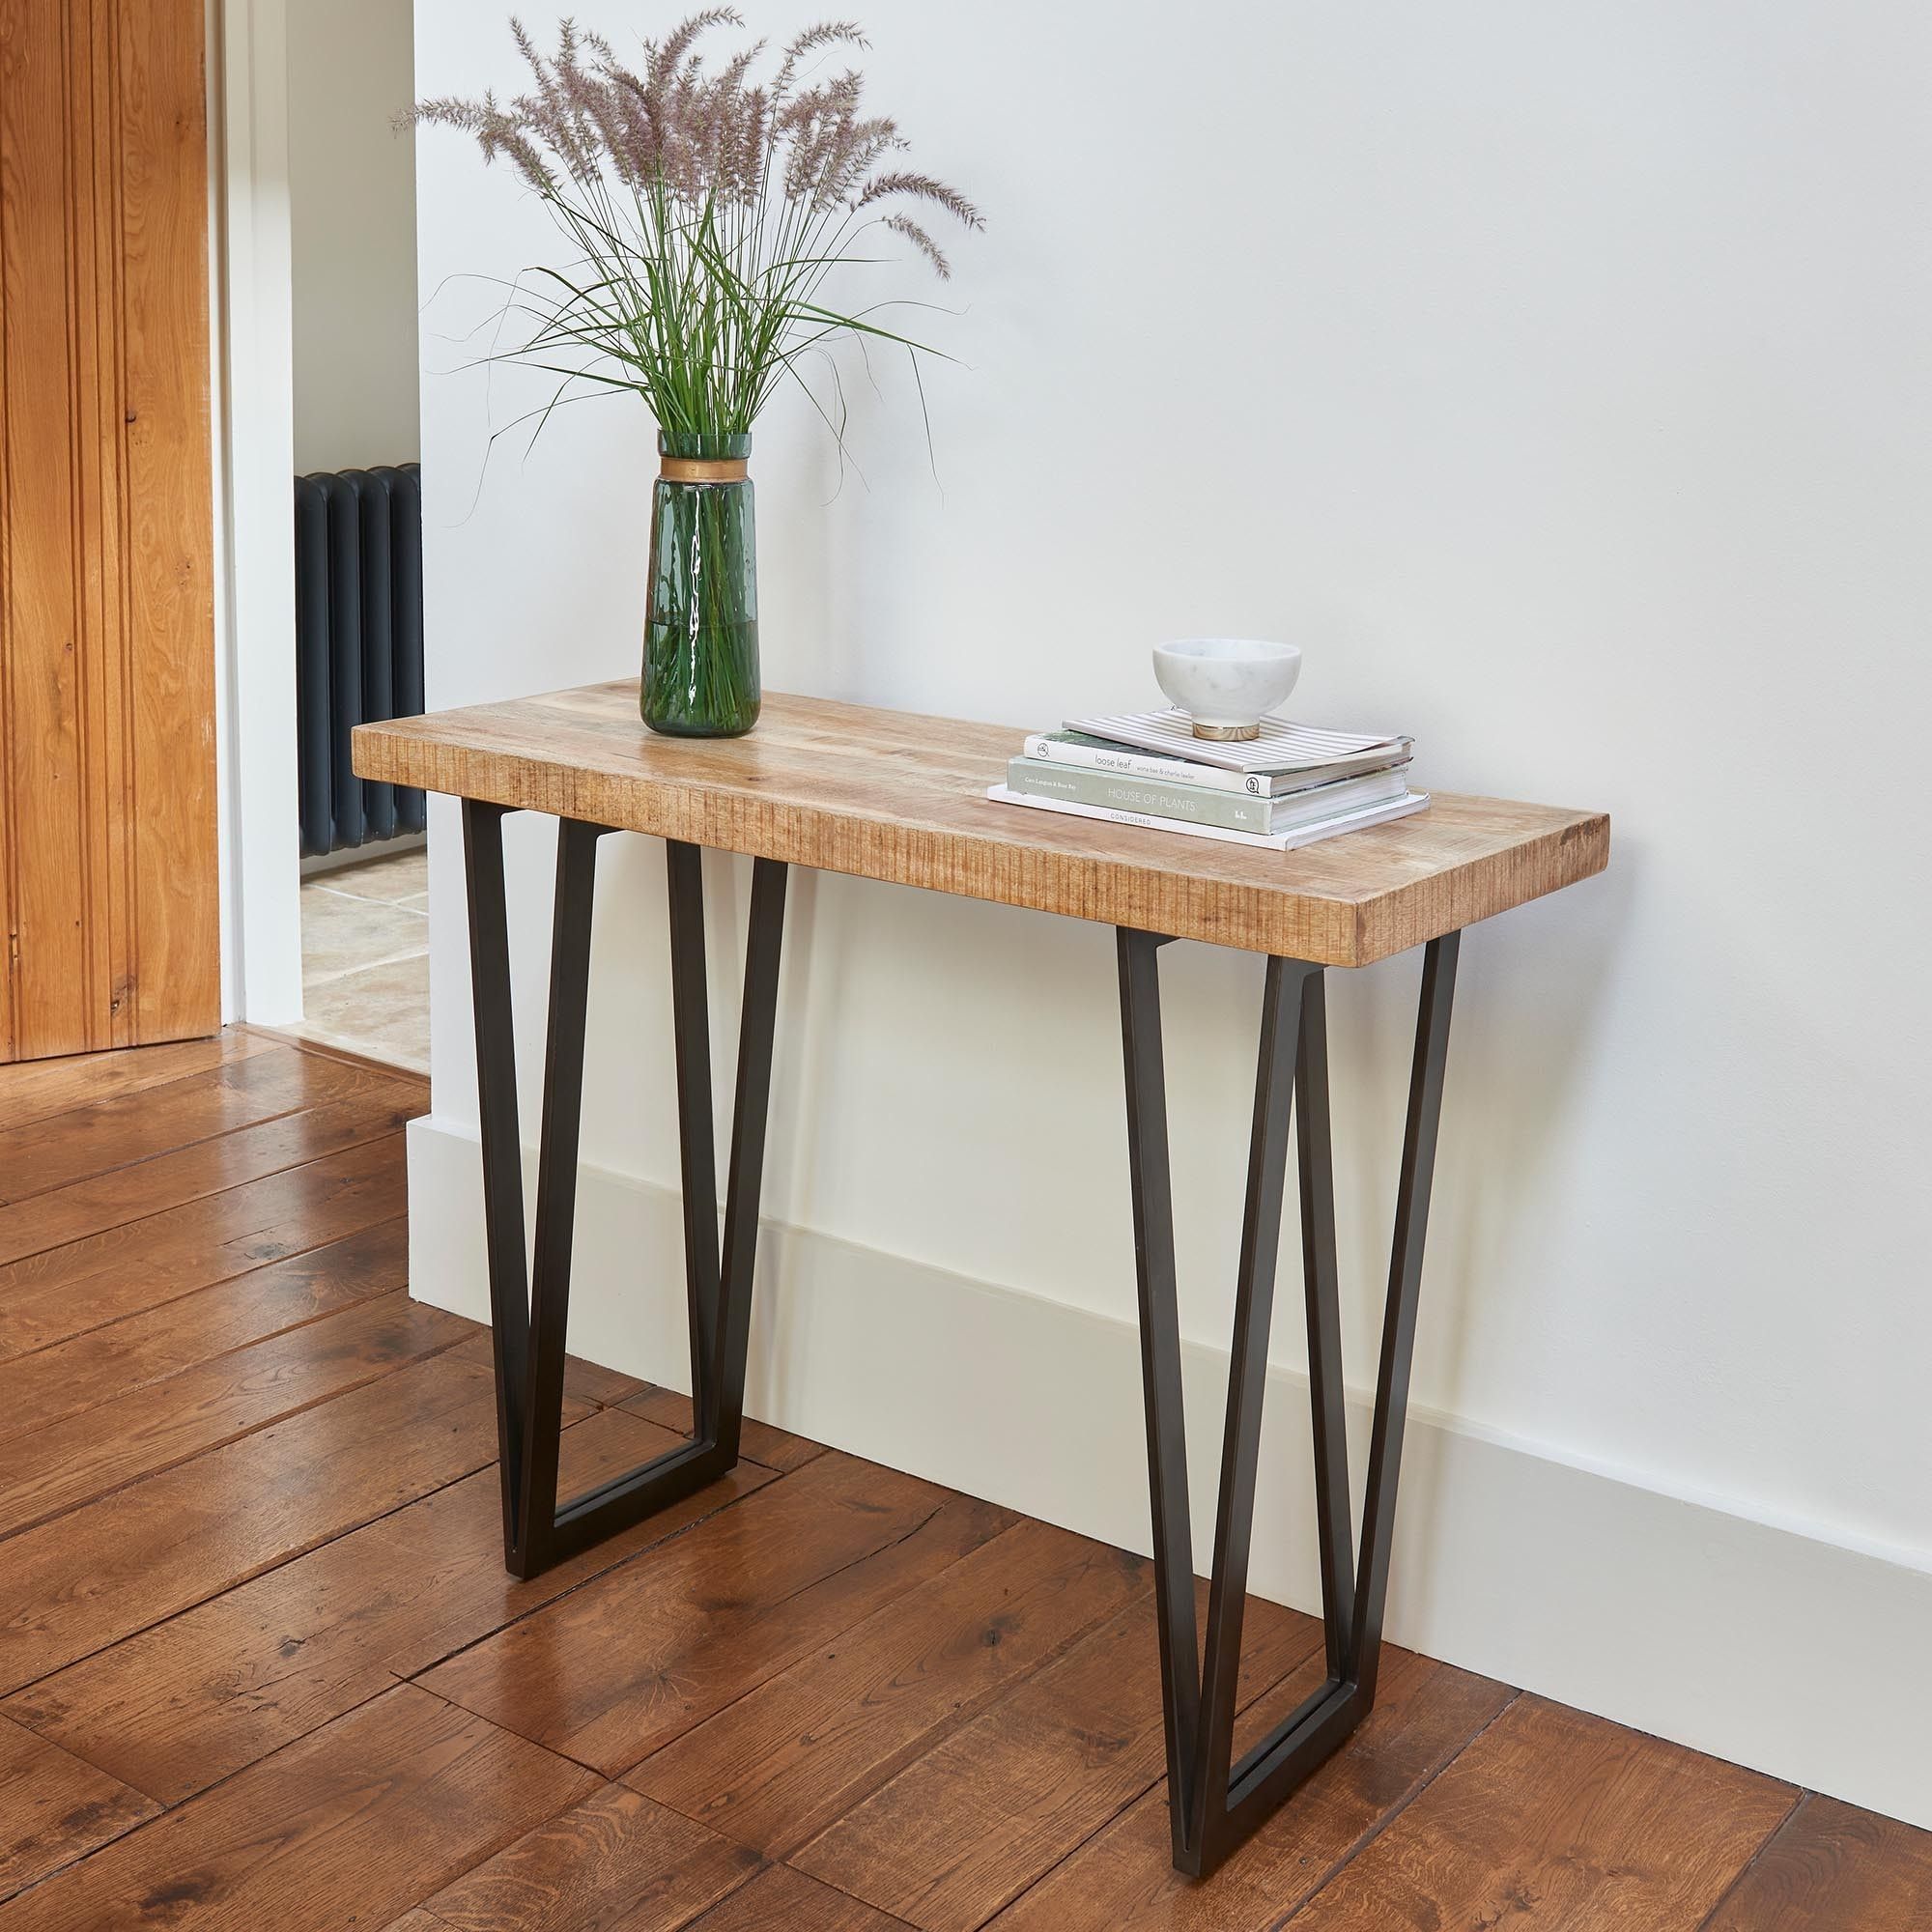 Industrial Mango Wood Console Table | Console Table | Wooden Table For Wood Console Tables (View 16 of 20)